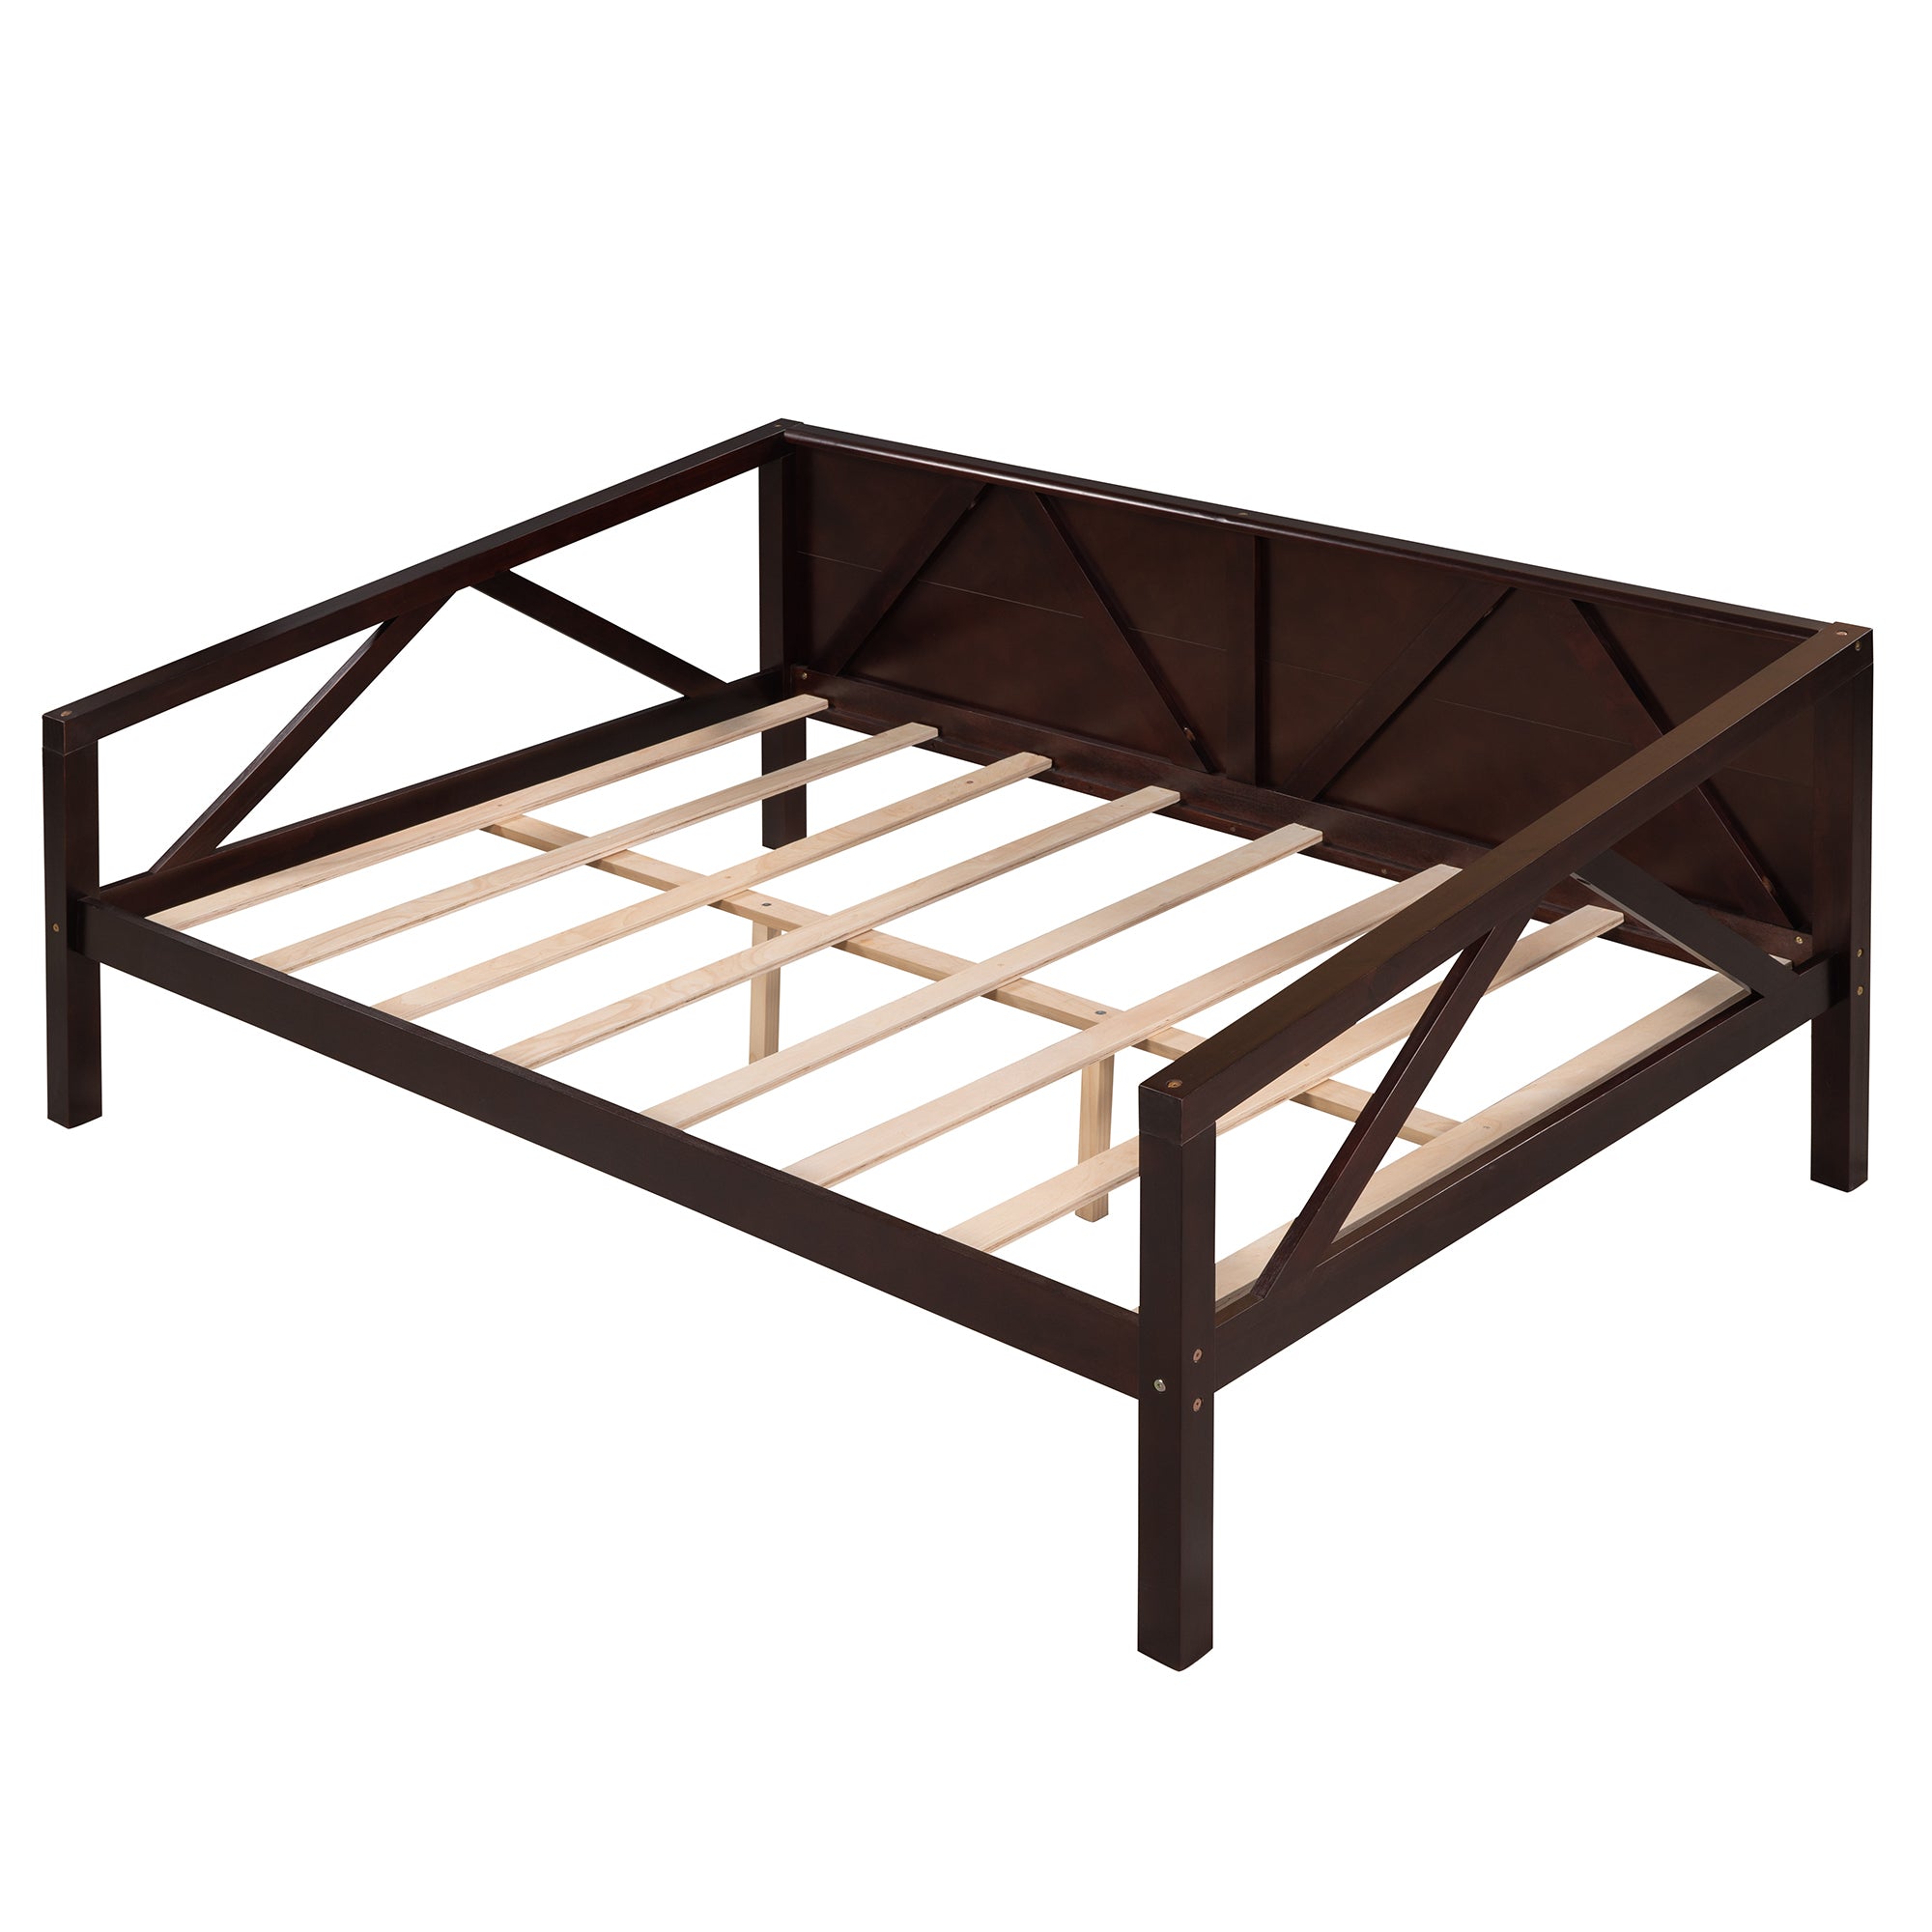 Full size Daybed, Wood Slat Support, Espresso espresso-solid wood